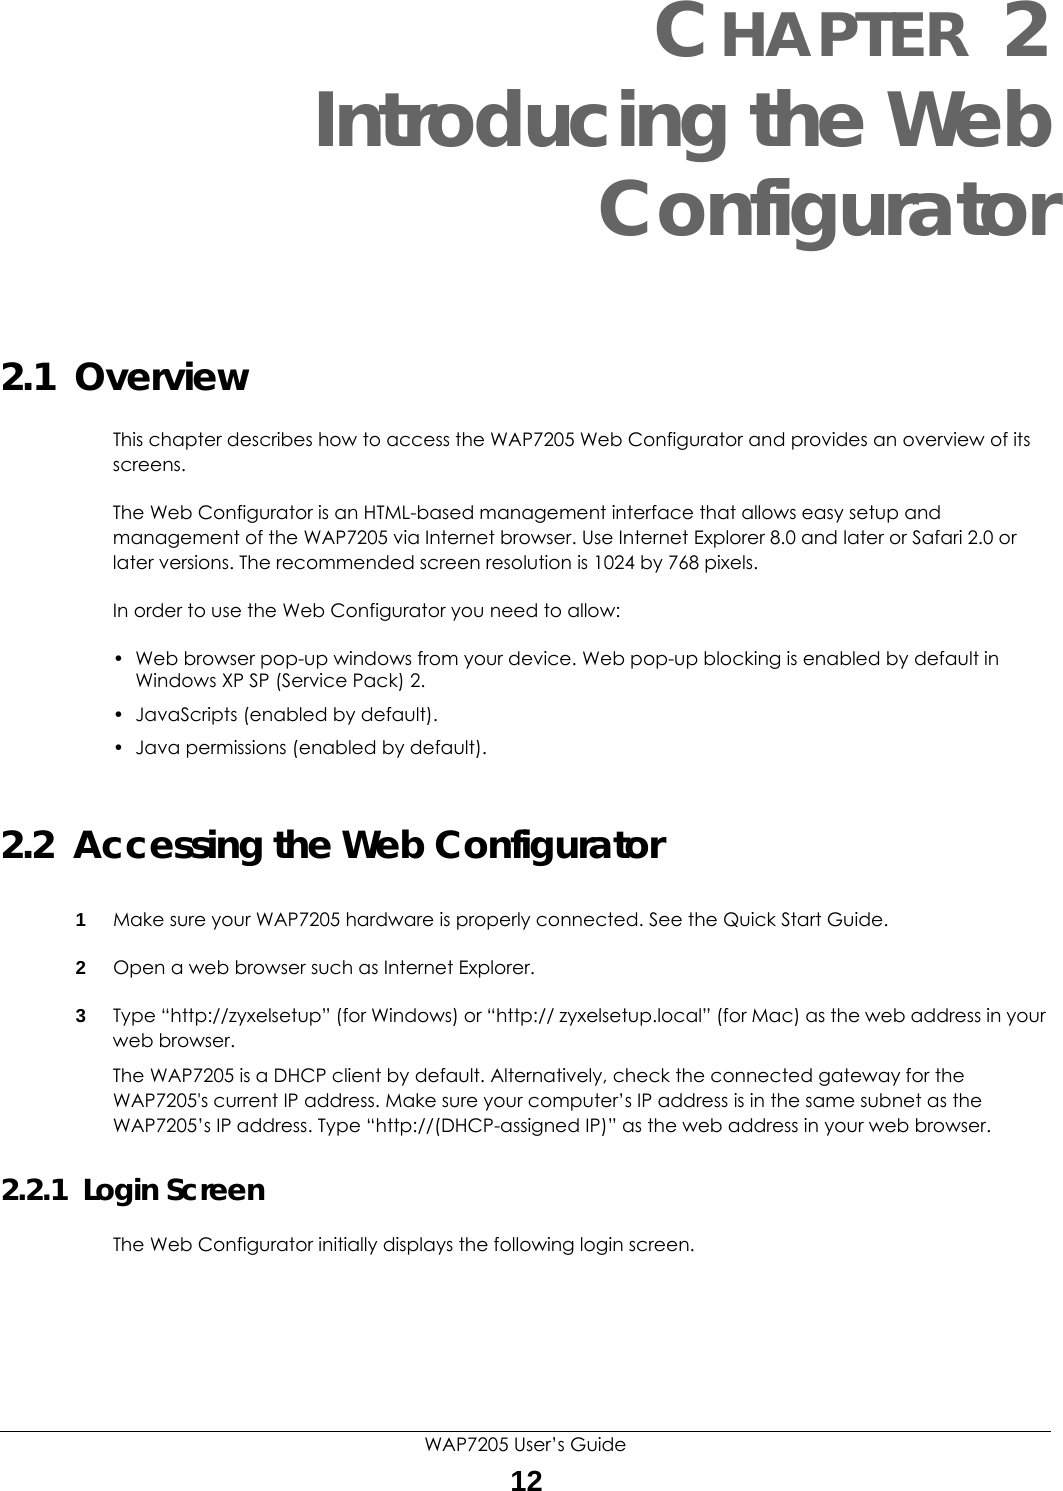 WAP7205 User’s Guide12CHAPTER 2Introducing the WebConfigurator2.1  OverviewThis chapter describes how to access the WAP7205 Web Configurator and provides an overview of its screens.The Web Configurator is an HTML-based management interface that allows easy setup and management of the WAP7205 via Internet browser. Use Internet Explorer 8.0 and later or Safari 2.0 or later versions. The recommended screen resolution is 1024 by 768 pixels.In order to use the Web Configurator you need to allow:• Web browser pop-up windows from your device. Web pop-up blocking is enabled by default in Windows XP SP (Service Pack) 2.• JavaScripts (enabled by default).• Java permissions (enabled by default).2.2  Accessing the Web Configurator1Make sure your WAP7205 hardware is properly connected. See the Quick Start Guide.2Open a web browser such as Internet Explorer. 3Type “http://zyxelsetup” (for Windows) or “http:// zyxelsetup.local” (for Mac) as the web address in your web browser.The WAP7205 is a DHCP client by default. Alternatively, check the connected gateway for the WAP7205&apos;s current IP address. Make sure your computer’s IP address is in the same subnet as the WAP7205’s IP address. Type “http://(DHCP-assigned IP)” as the web address in your web browser.2.2.1  Login ScreenThe Web Configurator initially displays the following login screen.